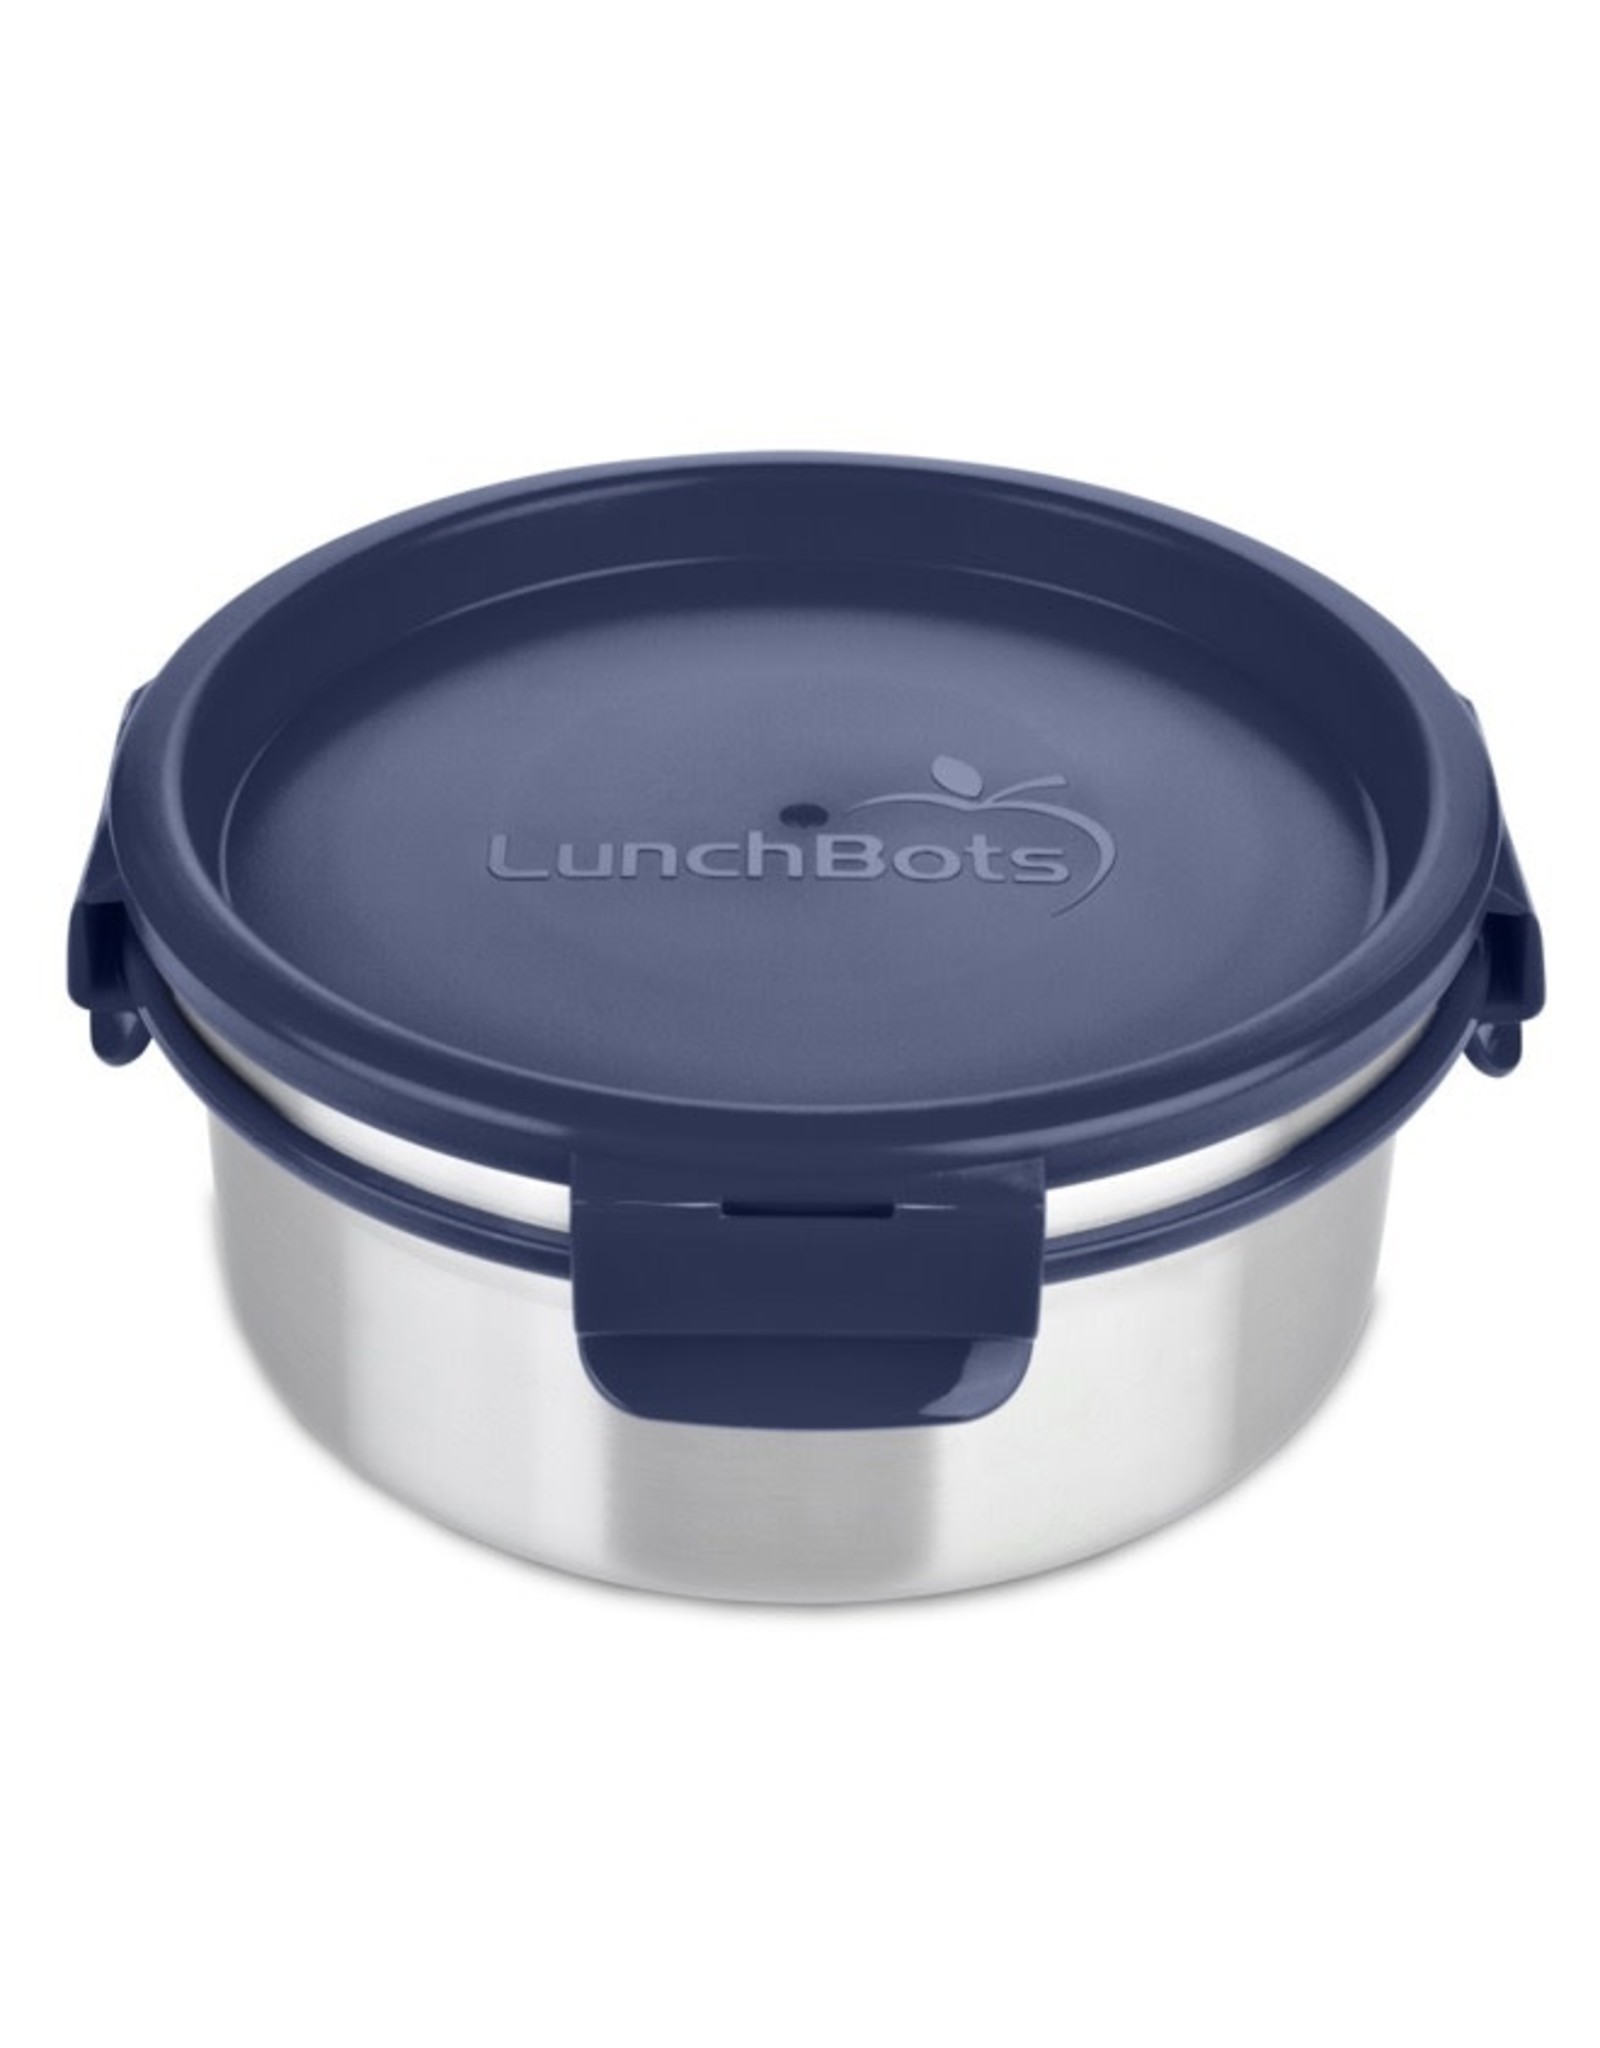 LunchBots LunchBots Salad Bowl 4 cup, Navy